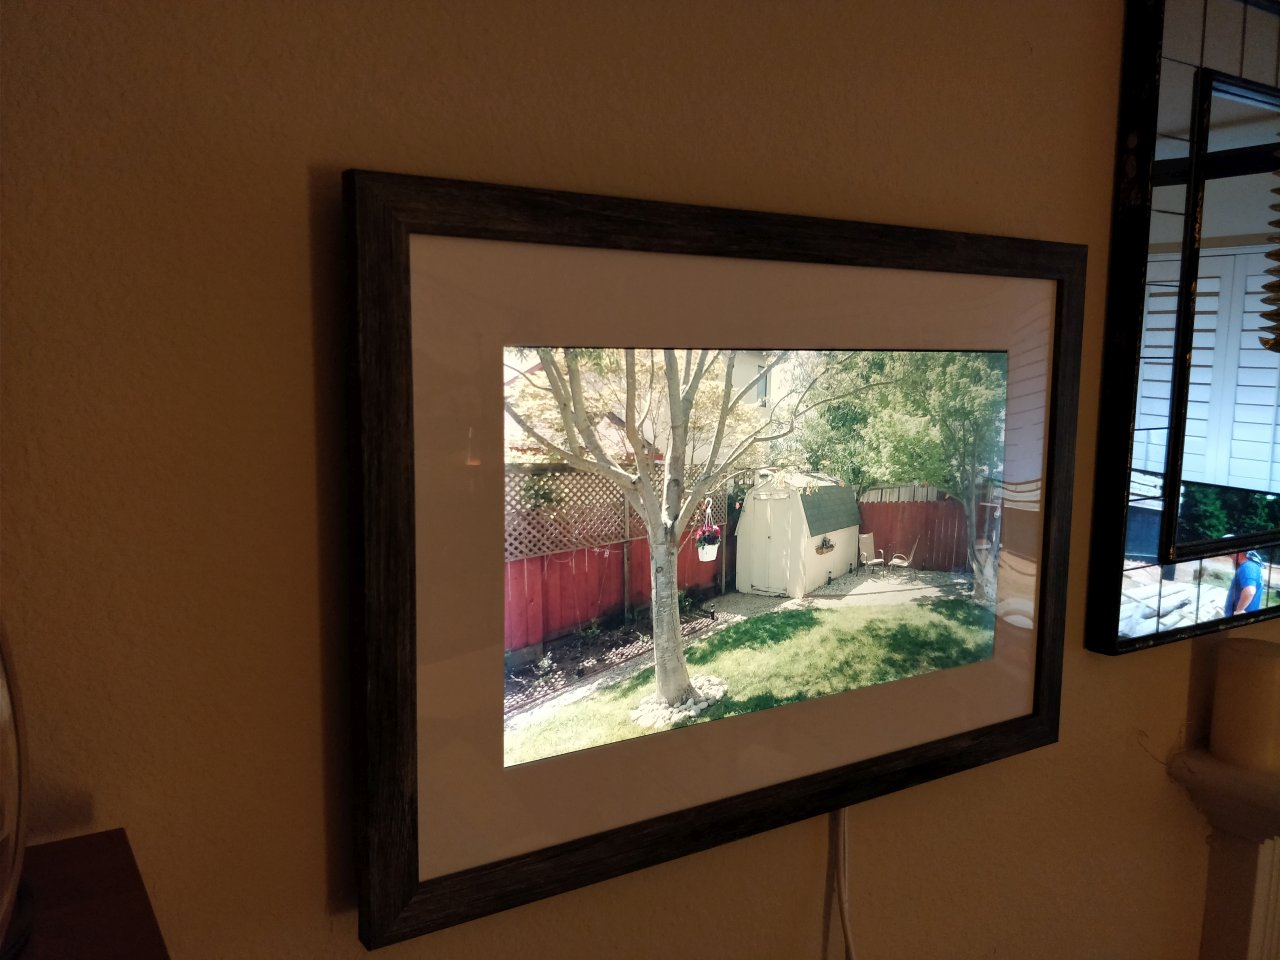 Shoot-And-Forget Digital Photo Frame | Hackaday